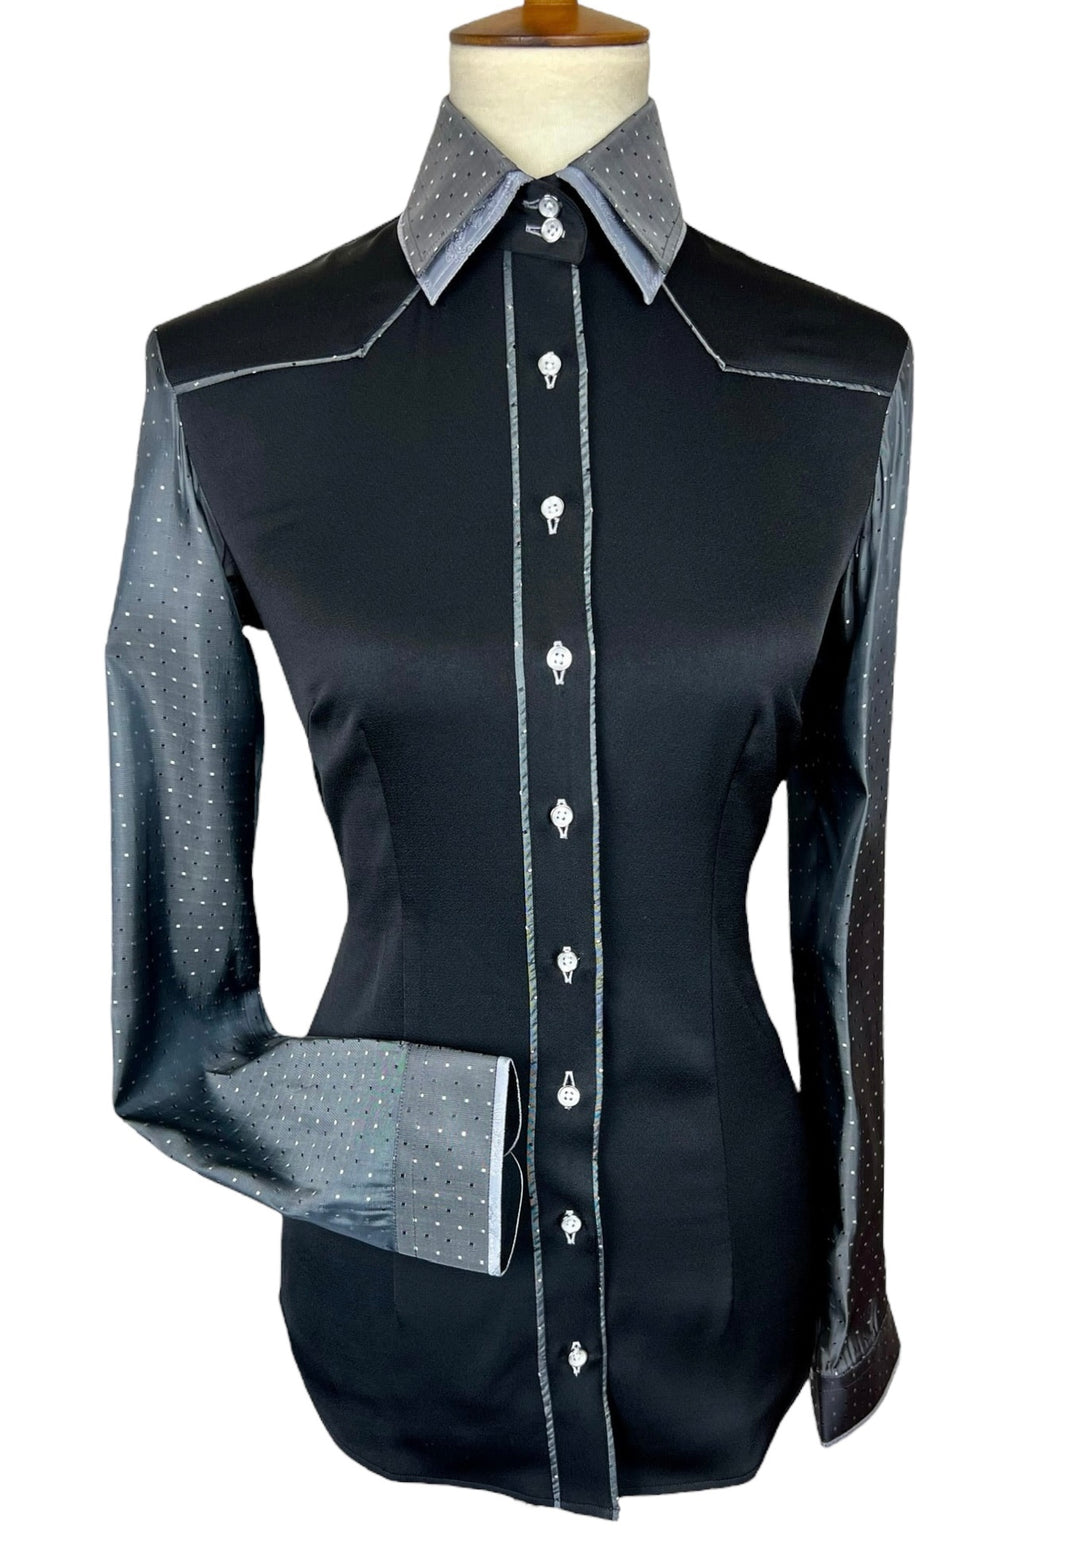 The Colette Western Shirt